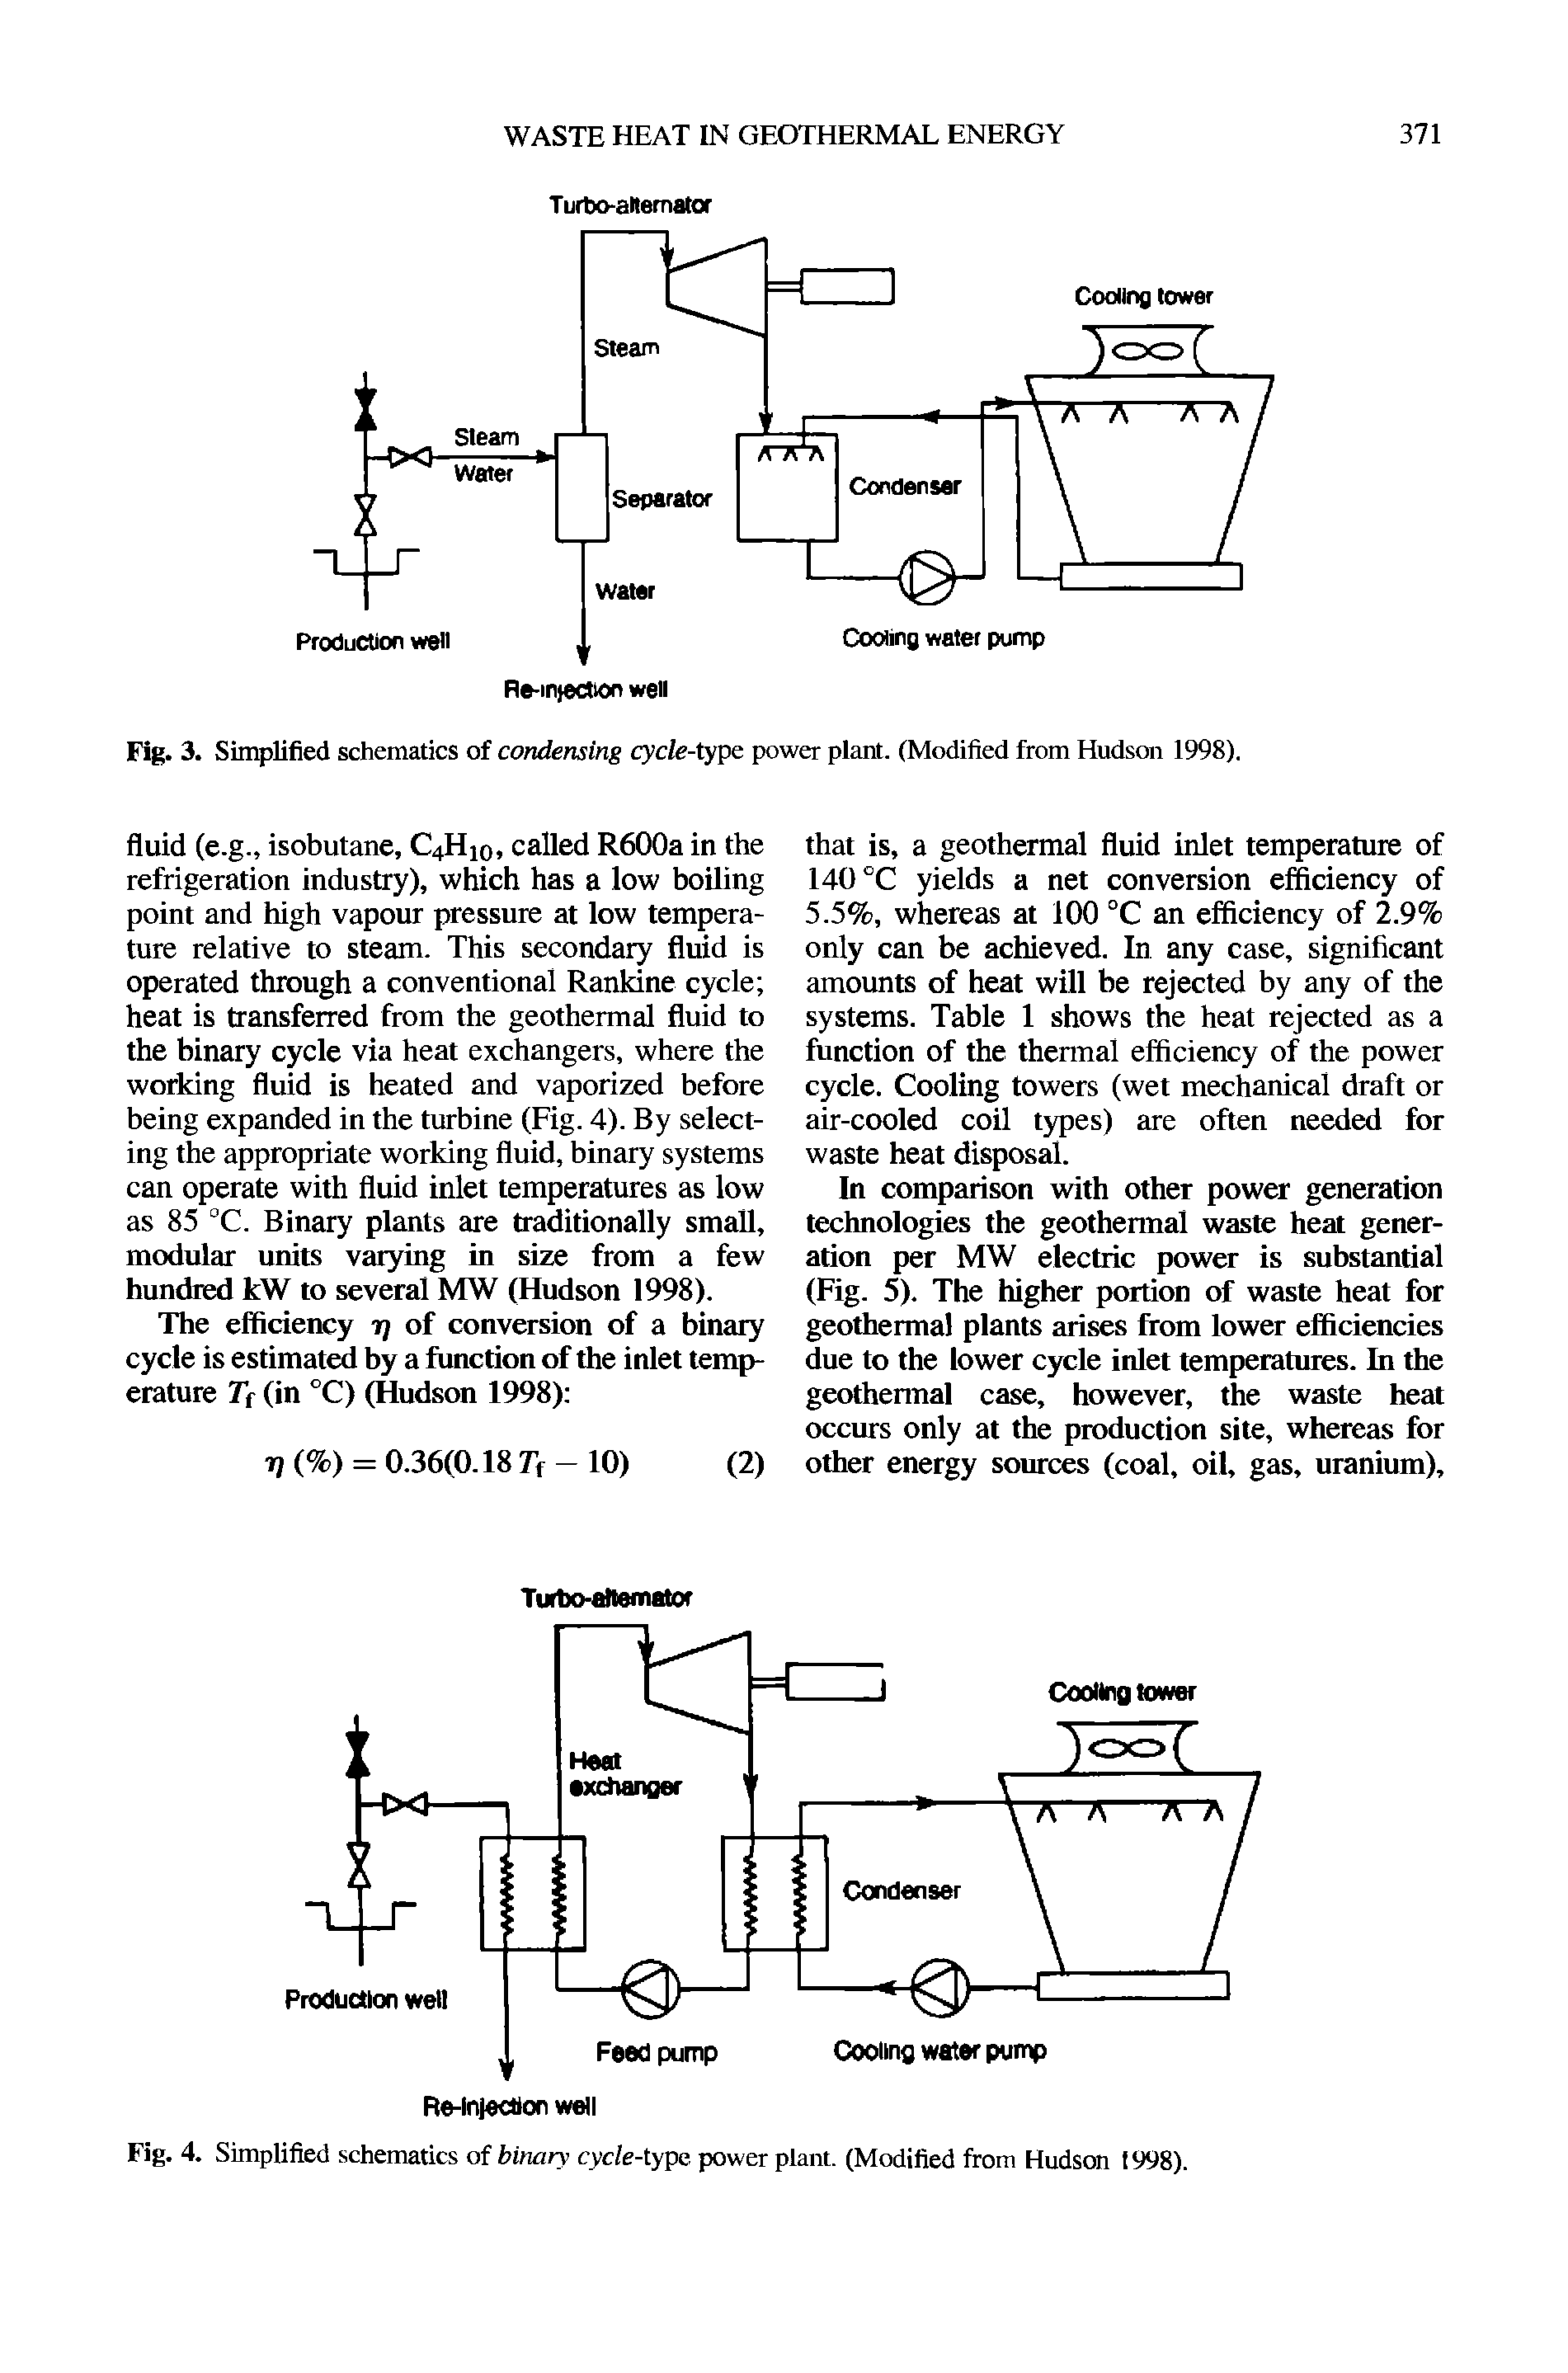 Fig. 3. Simplified schematics of condensing cycle-type power plant. (Modified from Hudson 1998).